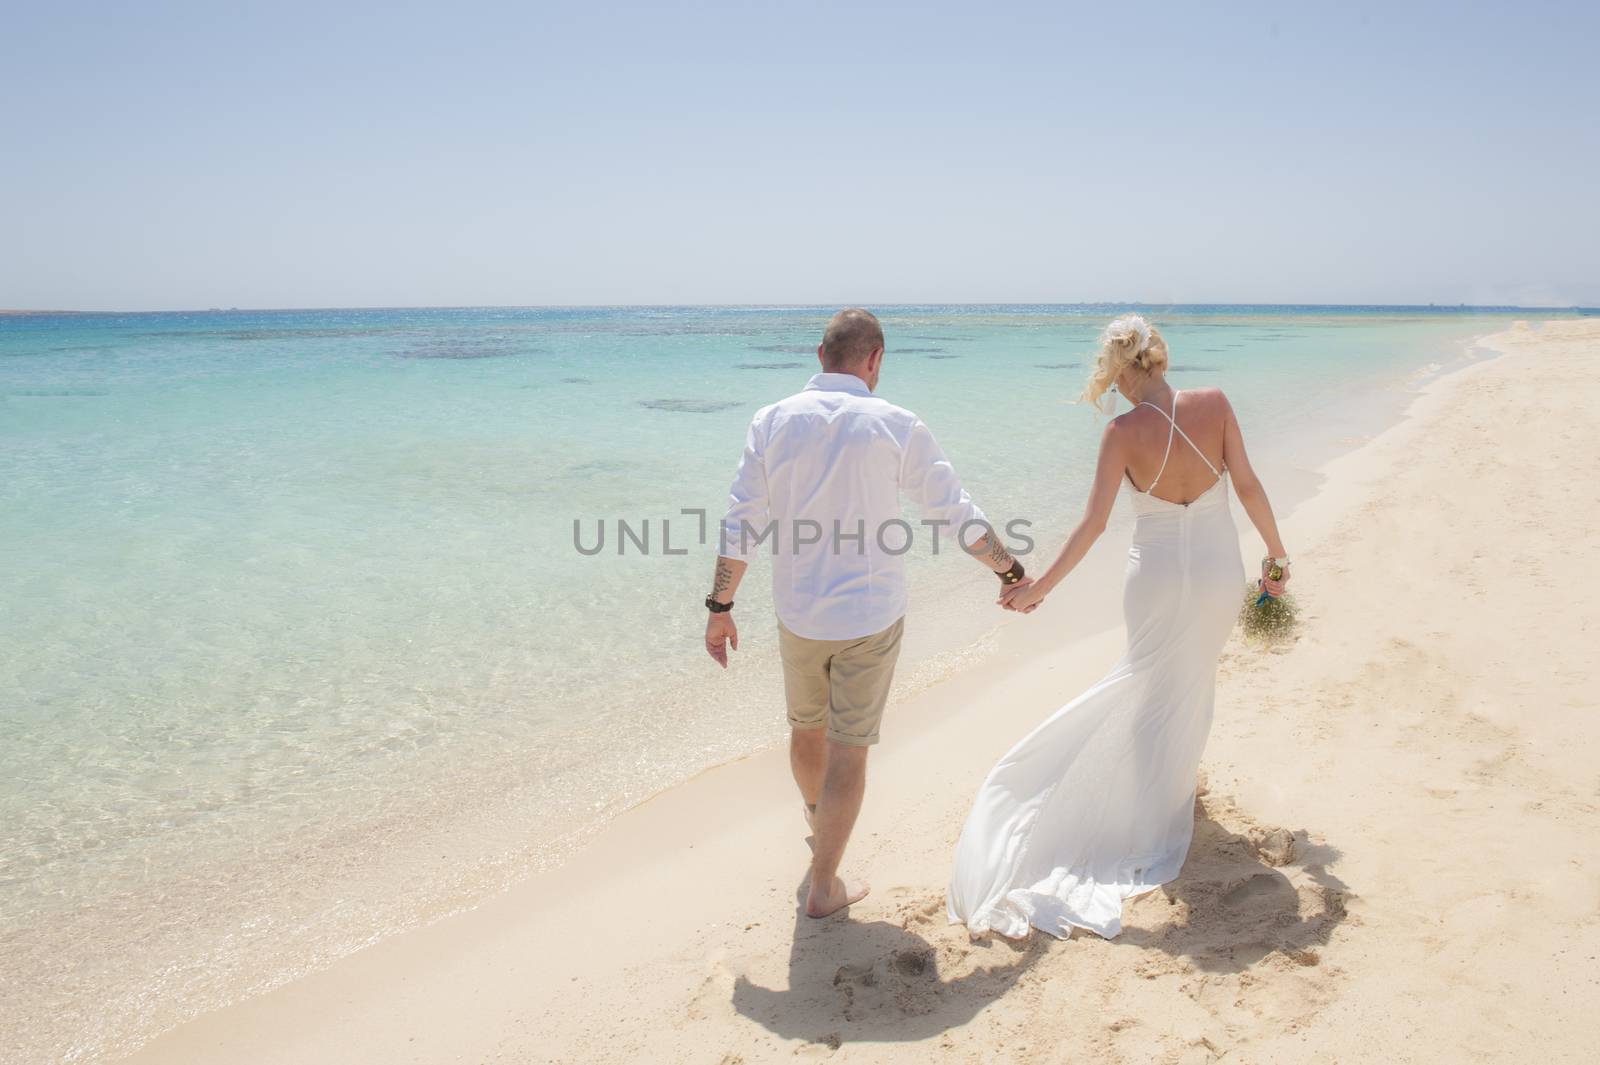 Beautiful married couple on a tropical beach wedding day by paulvinten